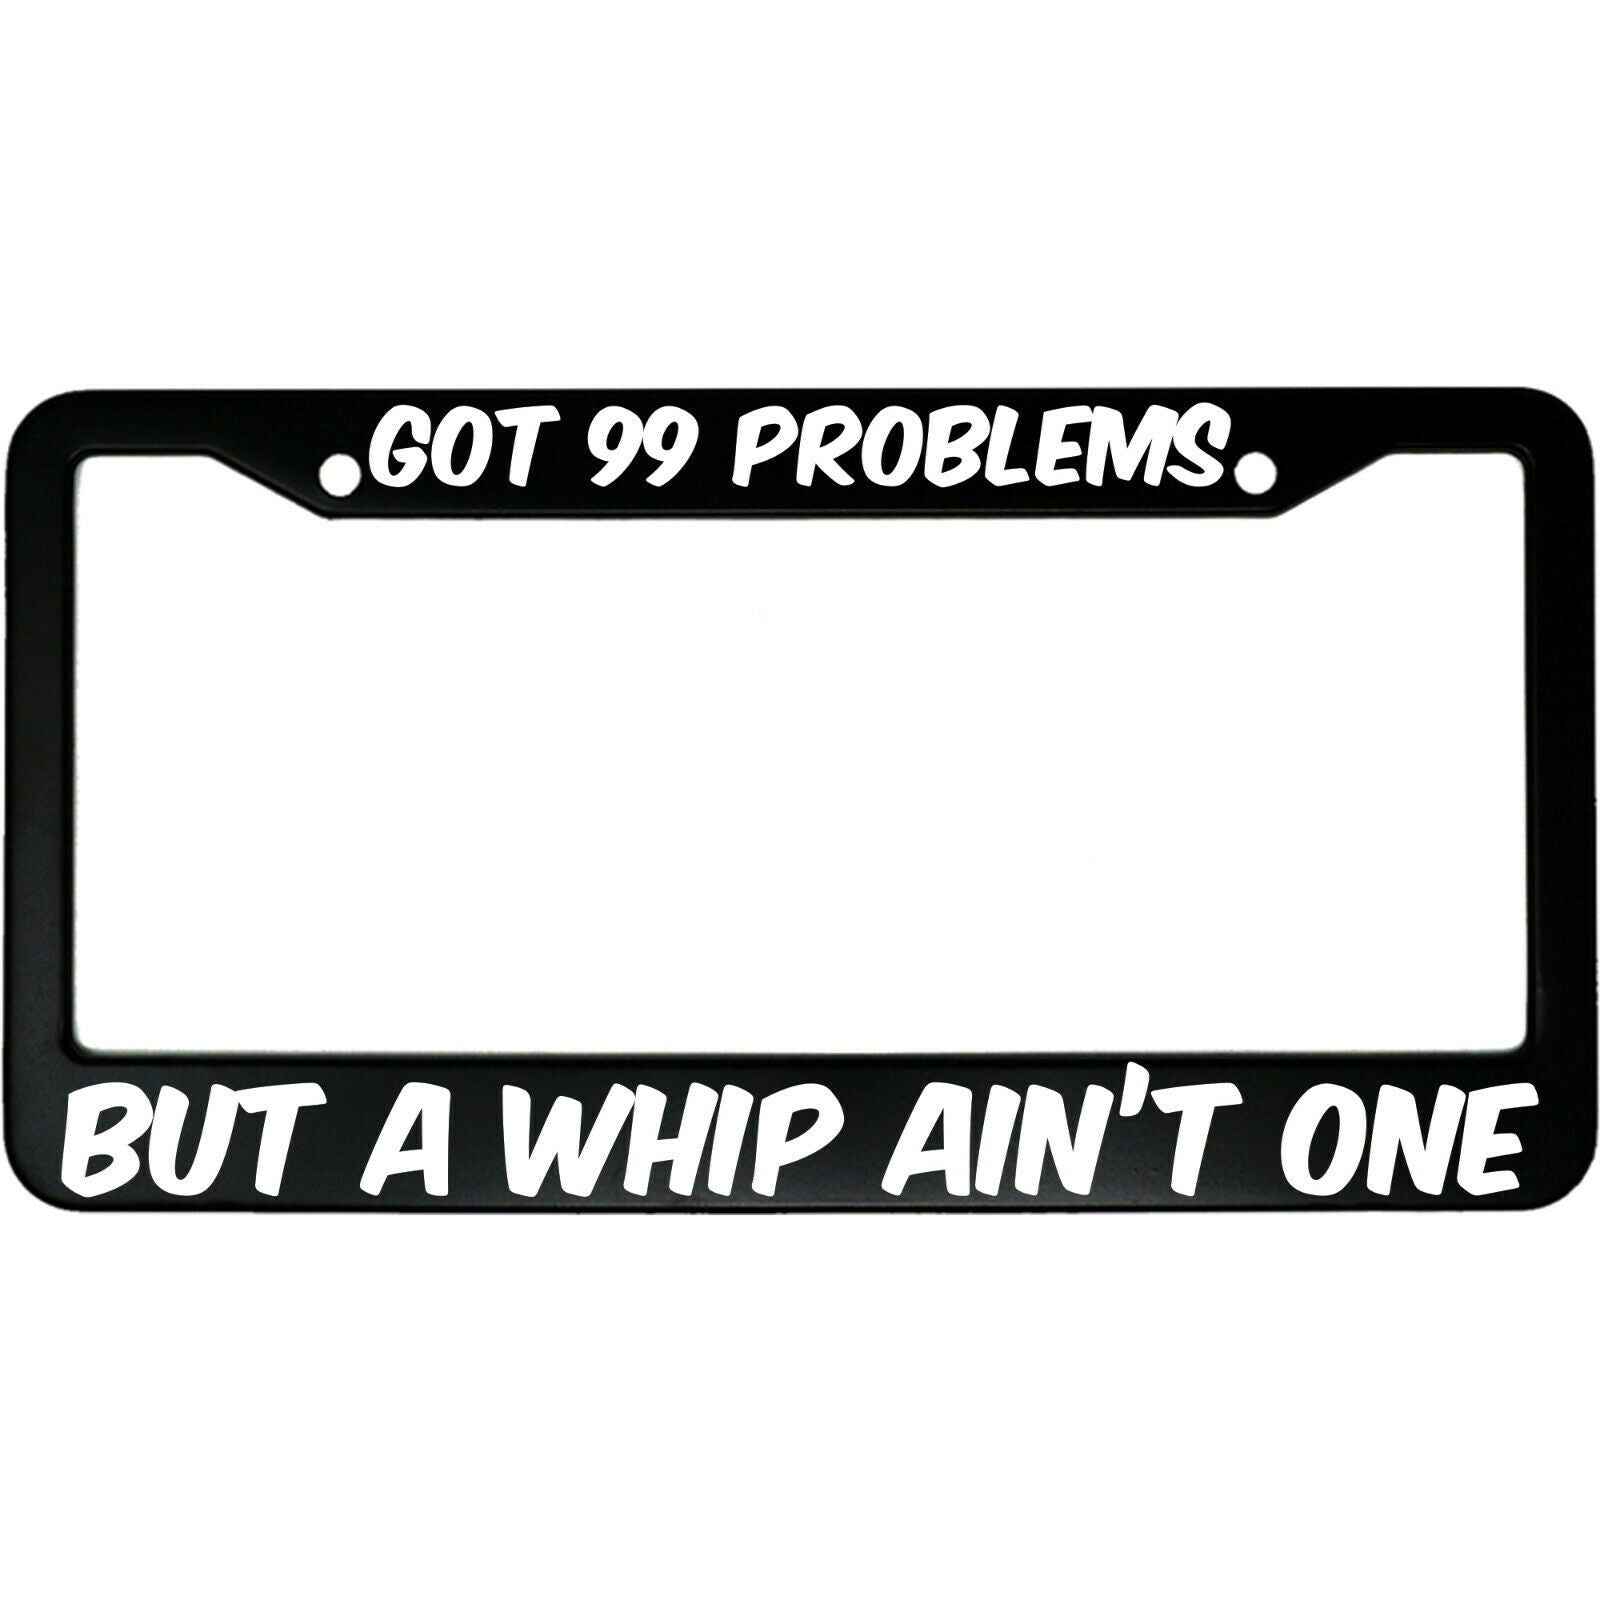 Got 99 Problems But A Whip Ain't One